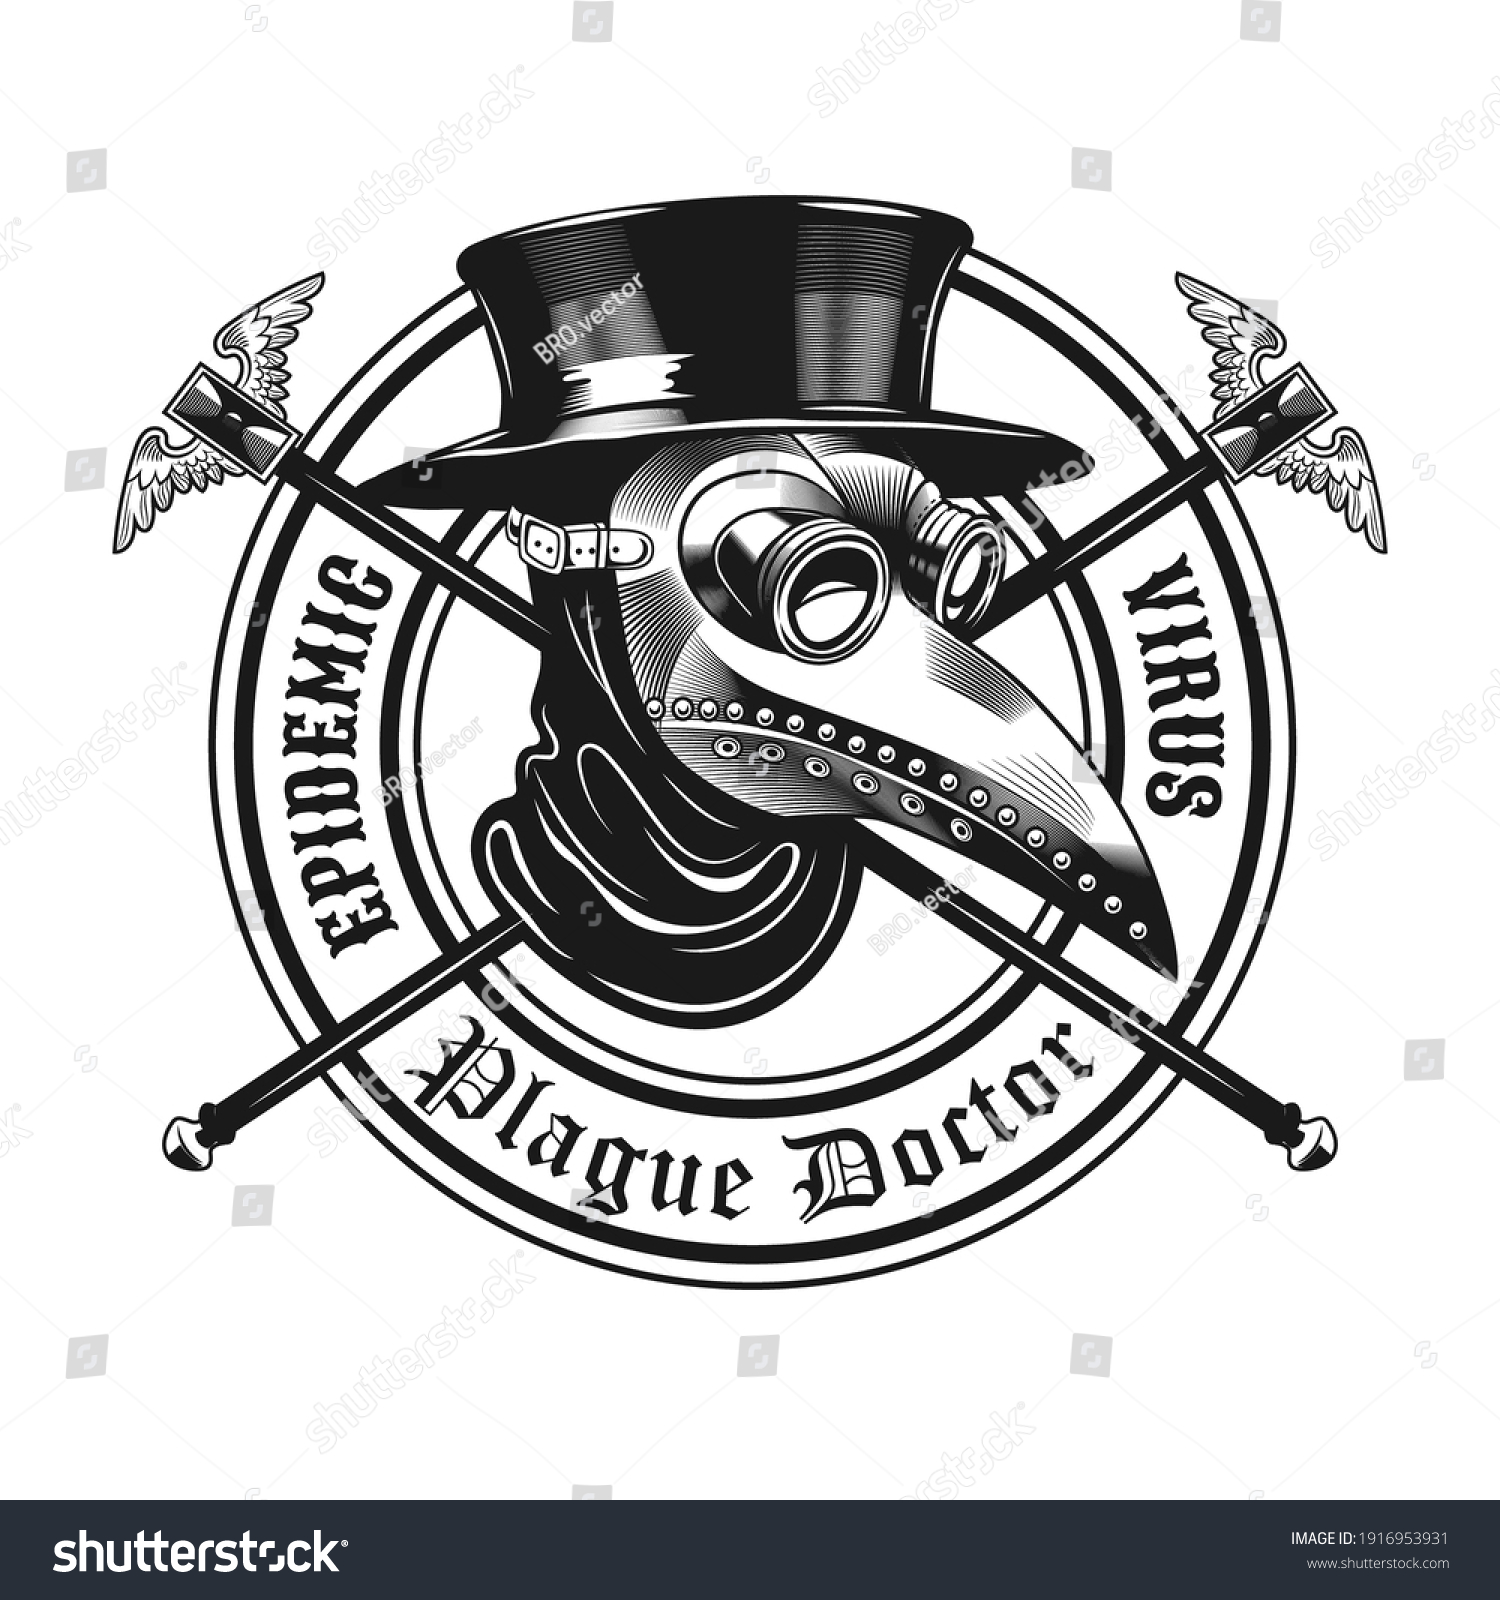 SVG of Plague doctor stamp design. Monochrome element with mask, top hat in circle vector illustration with text. Medieval or epidemic concept for symbols and labels templates svg